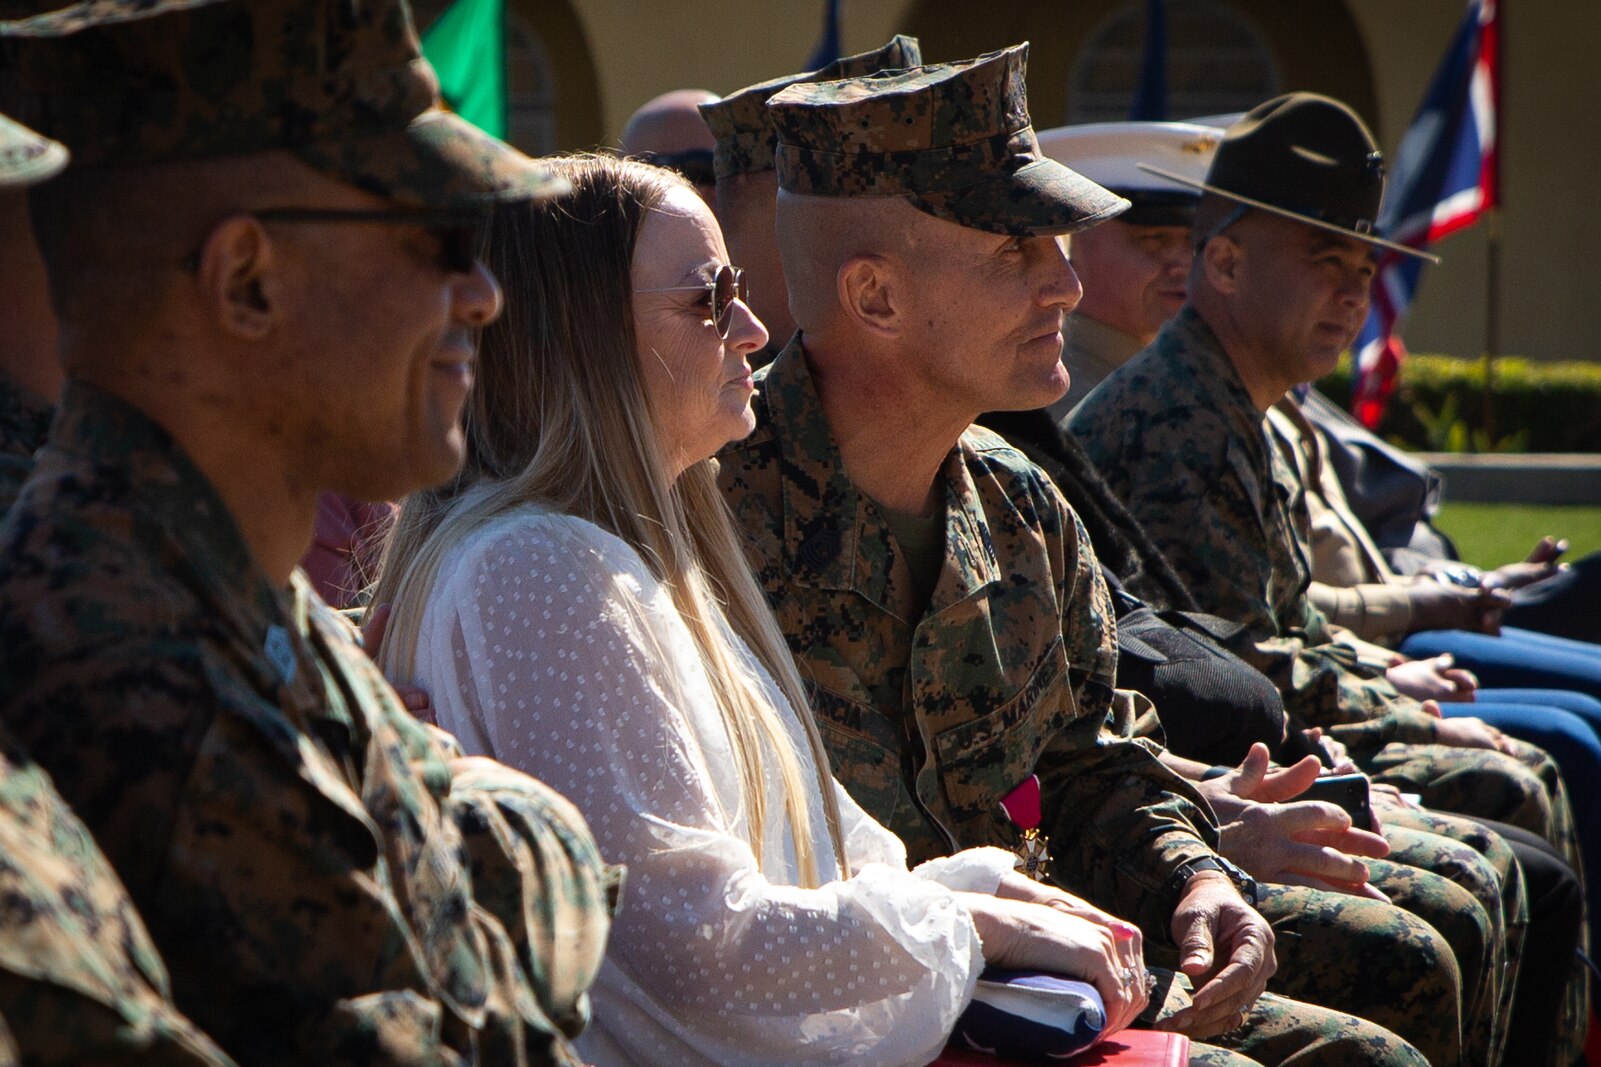 U.S. Marine Corps Sgt. Maj. Carlos M. Murcia, the outgoing sergeant major for 12th Marine Corps District, listens to the Col. James B. Conway, the commanding officer for 12th Marine Corps Dirstrict, during a relief and appointment ceremony at Marine Corps Recruit Depot, San Diego, California on Feb. 25, 2022. Murcia retired after 30 years of honorable service. (U.S. Marine Corps photo by Cpl. Emely Gonzalez)